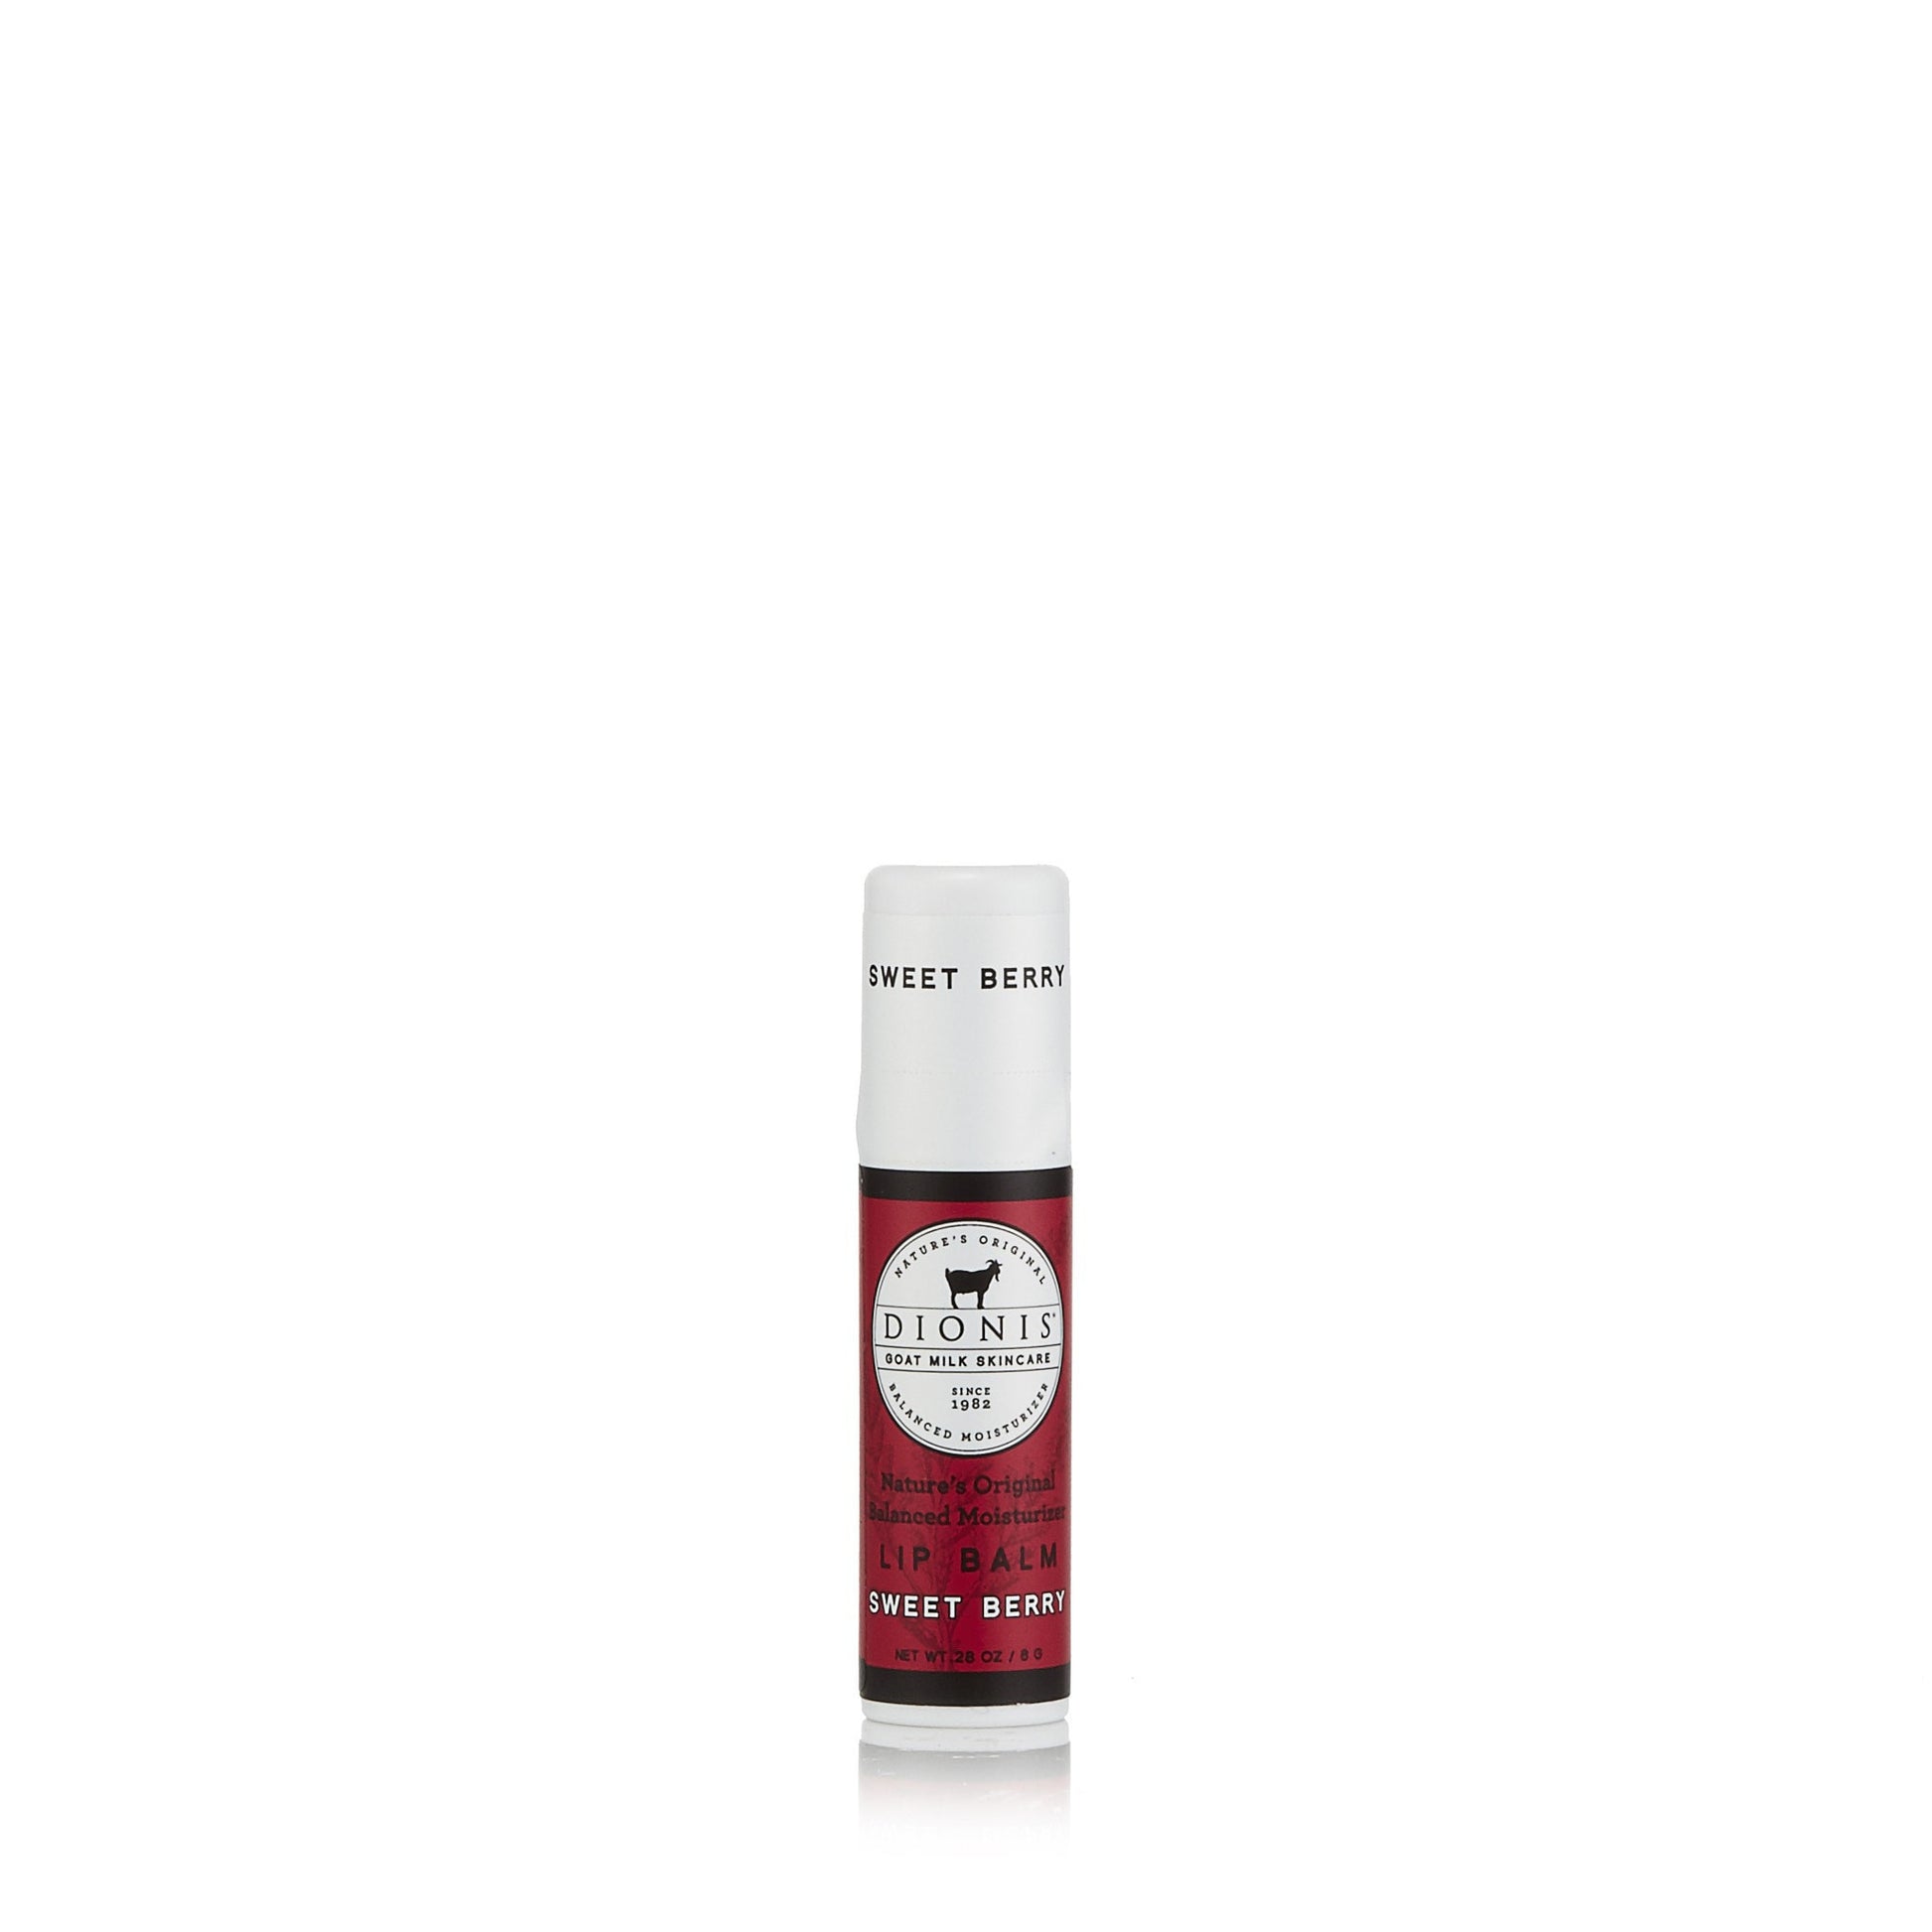 Lip Balm by Dionis Sweet Berry Click to open in modal